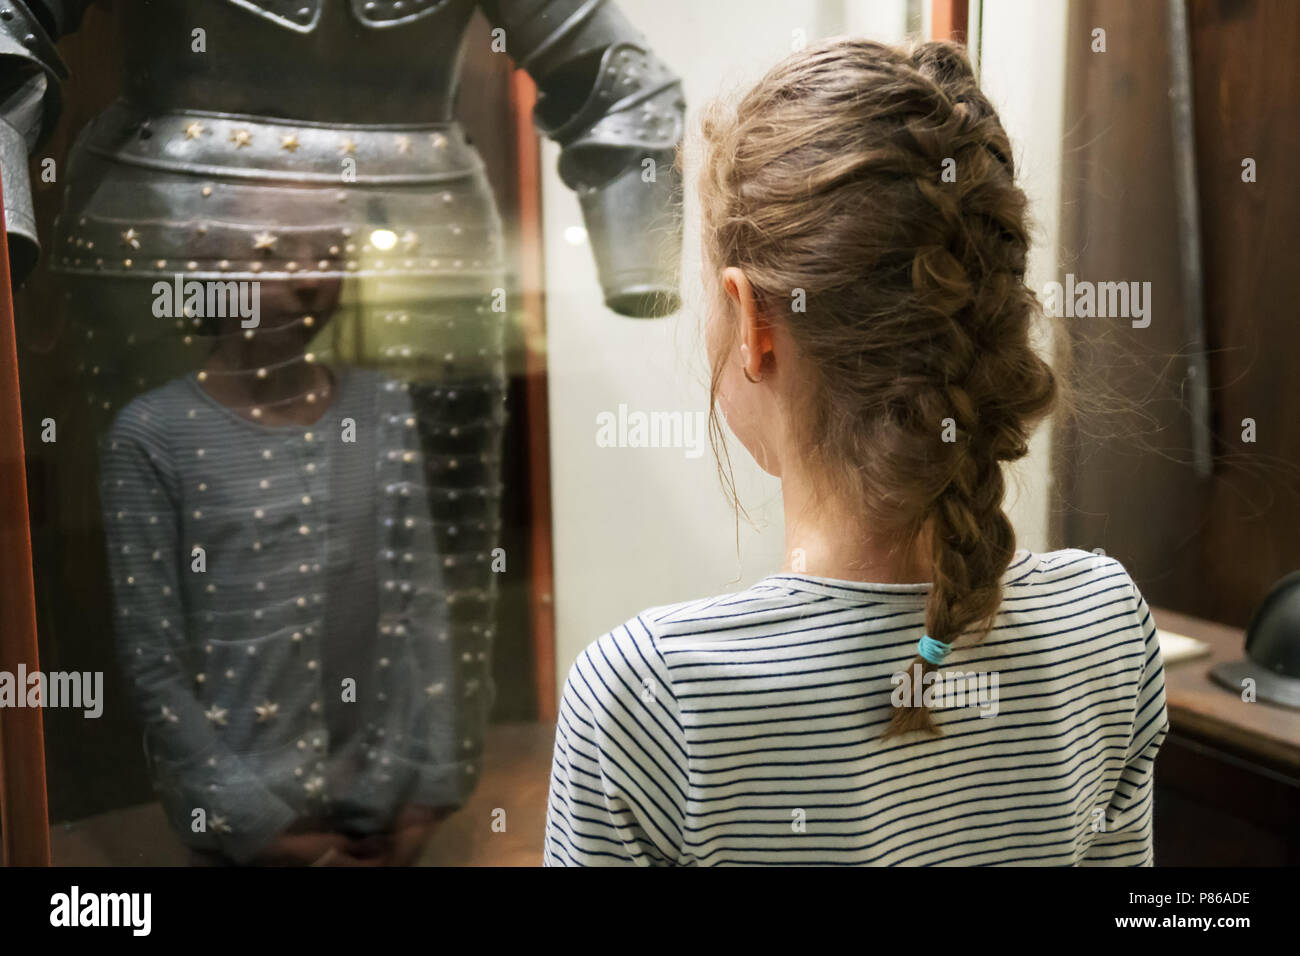 Little girl exploring expositions in museum. Stock Photo